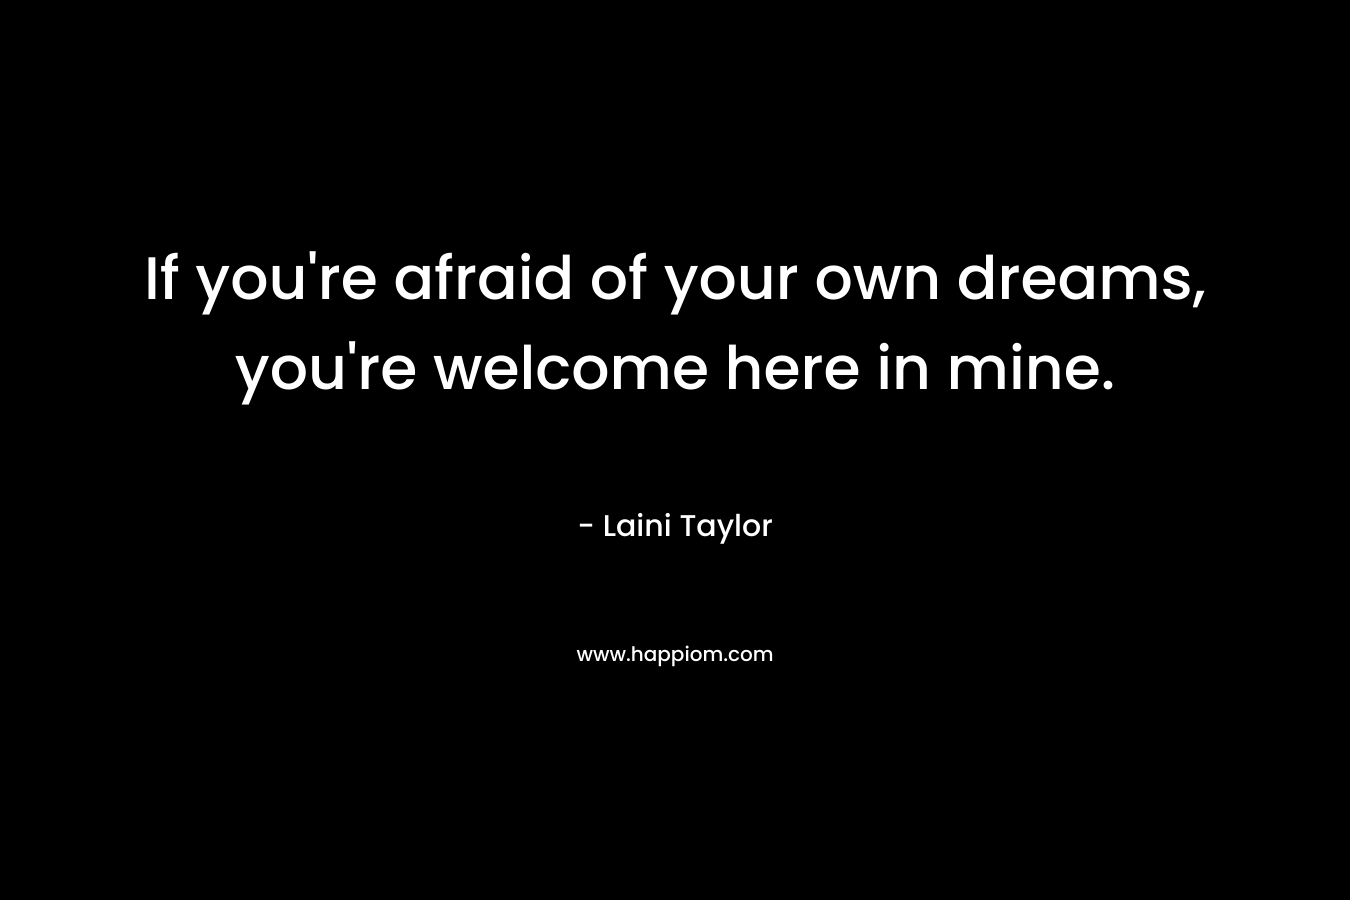 If you're afraid of your own dreams, you're welcome here in mine.